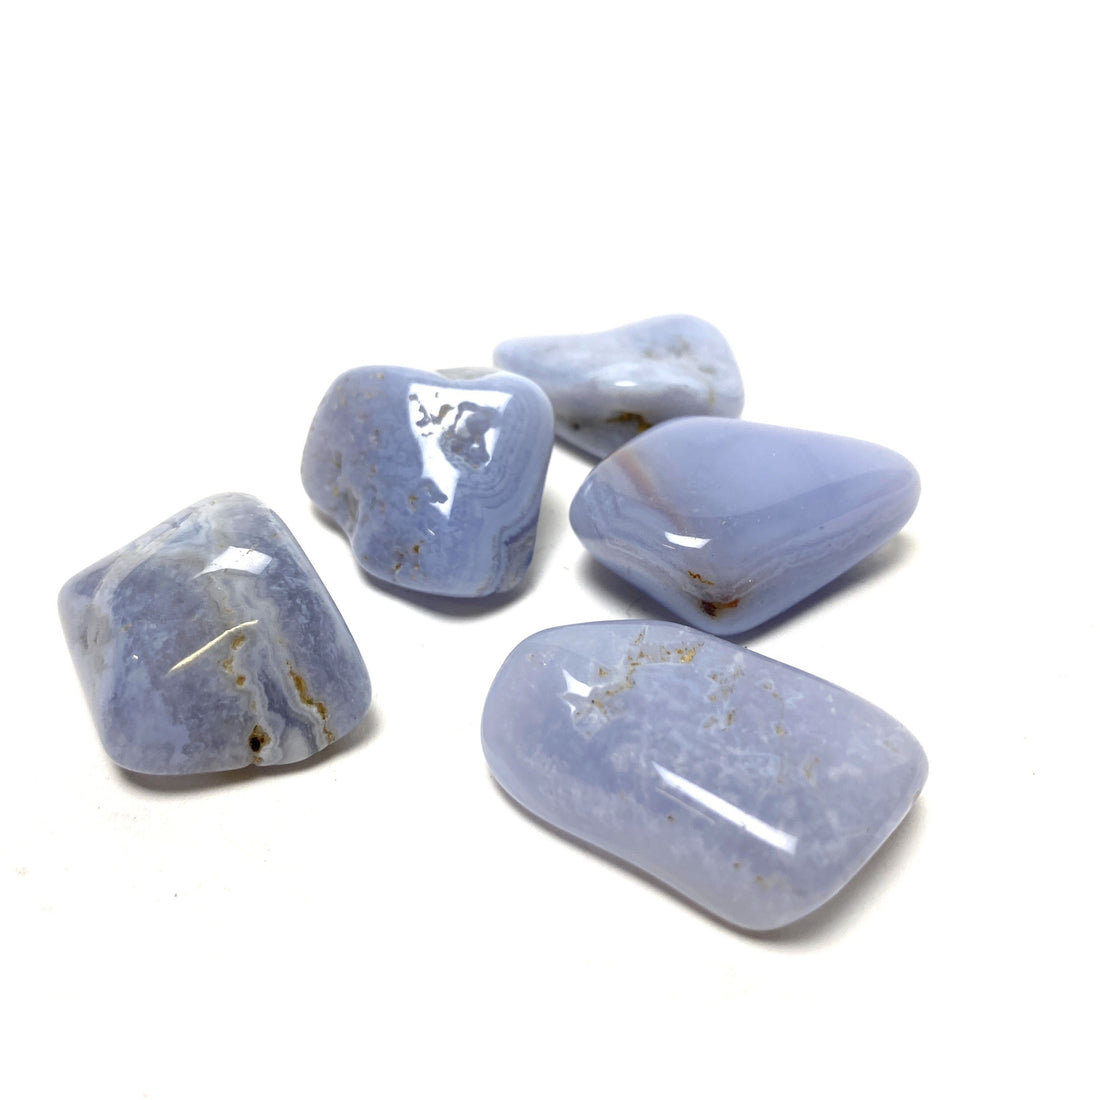 Blue Lace Agate ( aka Blue Storm Agate) Blue Lace Agate Crystals 